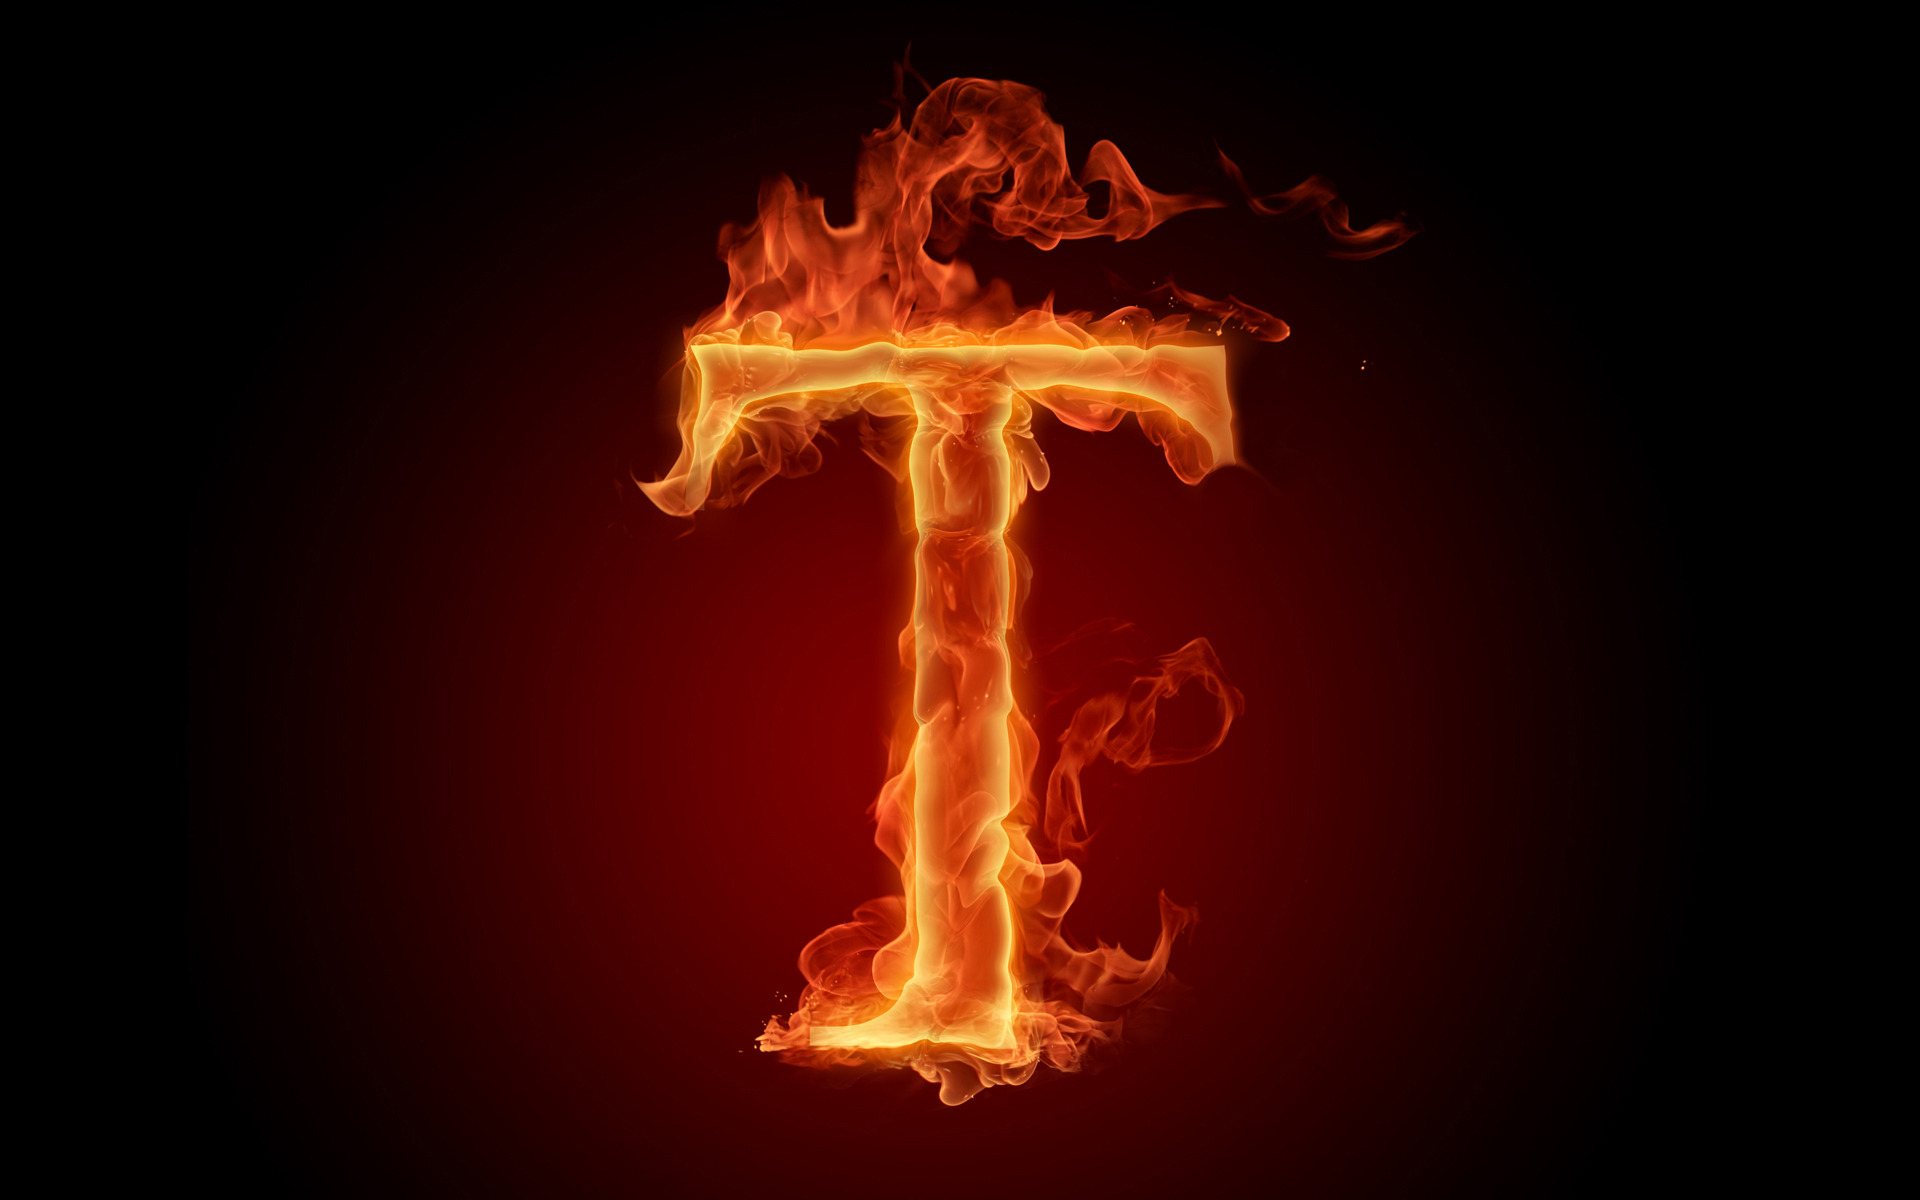 The Fiery English Alphabet Picture T Wallpapers Hd HD Wallpapers Download Free Images Wallpaper [wallpaper981.blogspot.com]